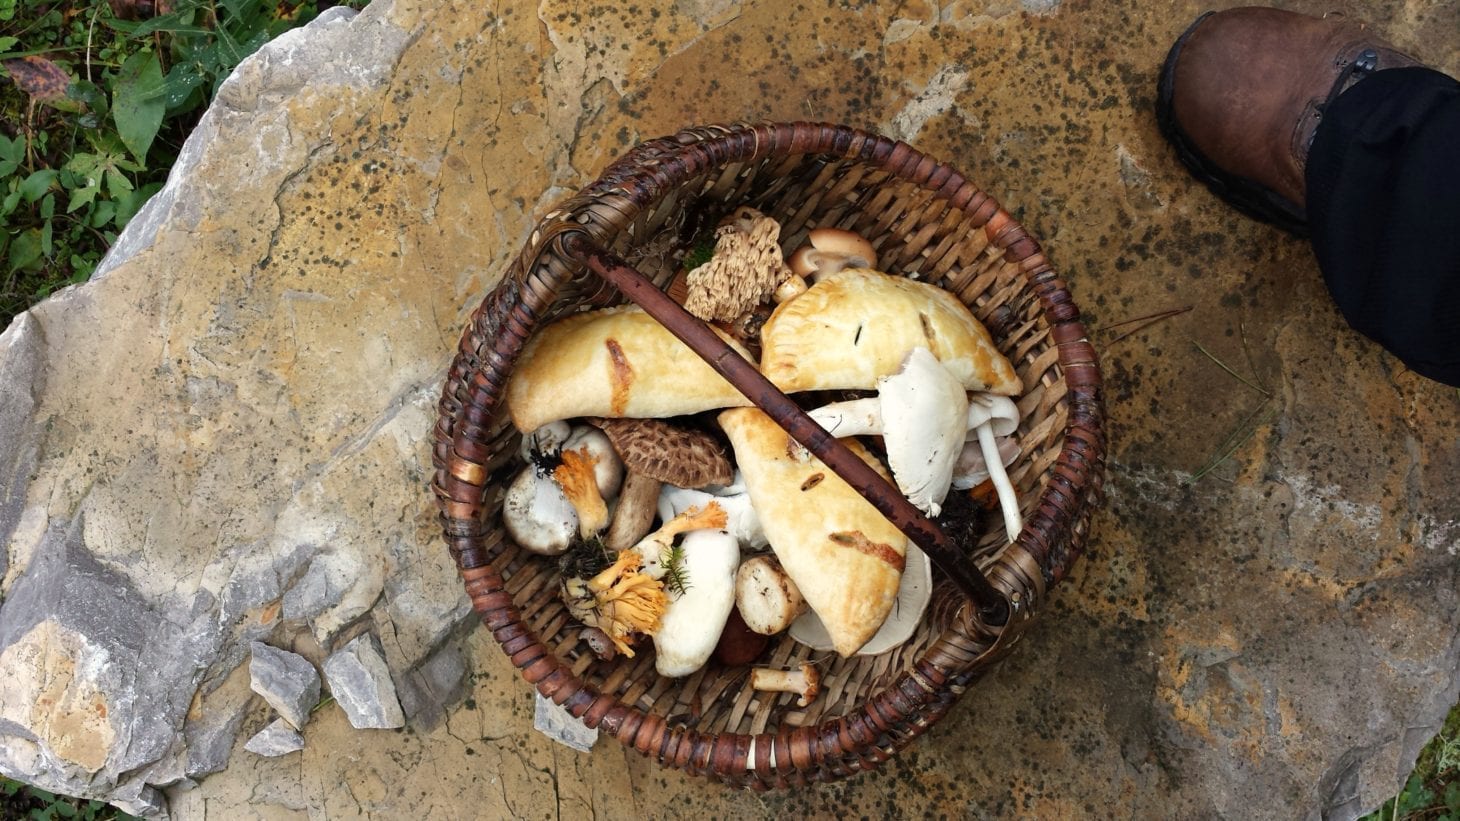 Delicious and Portable Mushroom Hand Pies for the discerning Forager or Picnic-er #handpies #foraging #mushroomhandpies